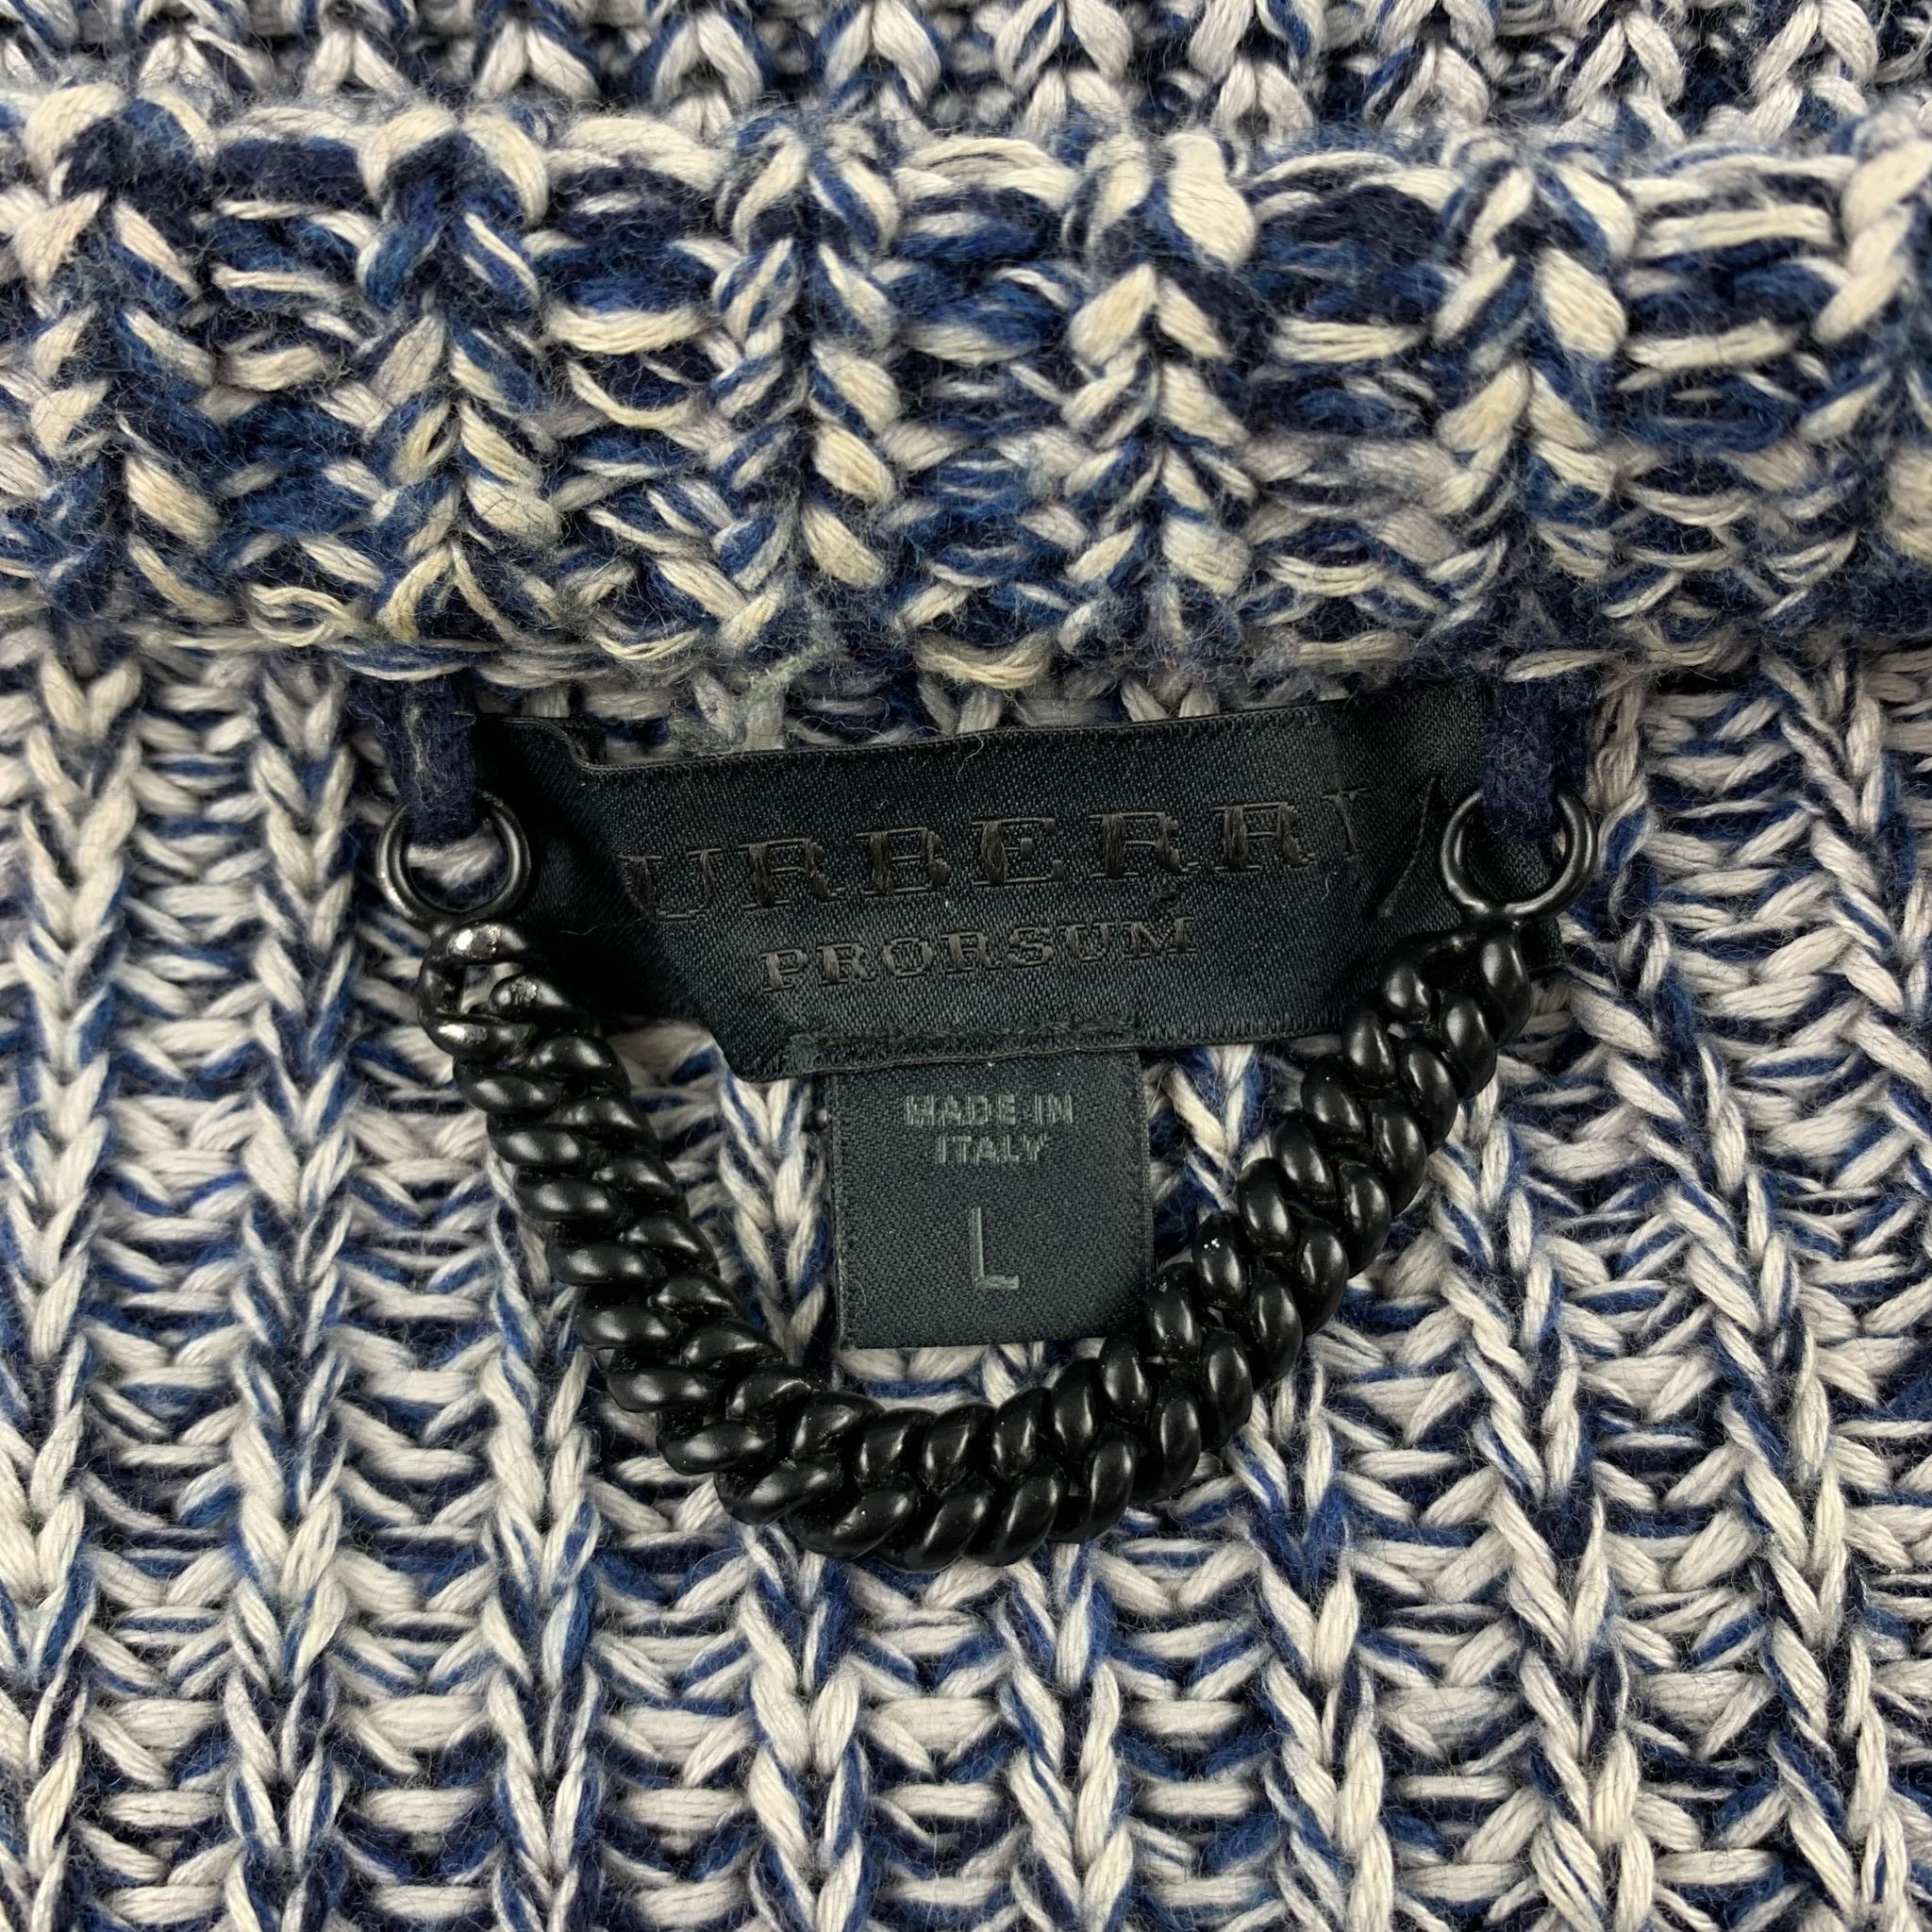 Black BURBERRY PRORSUM Spring 2012 Size L Navy & White Knitted Wool Fisherman Sweater